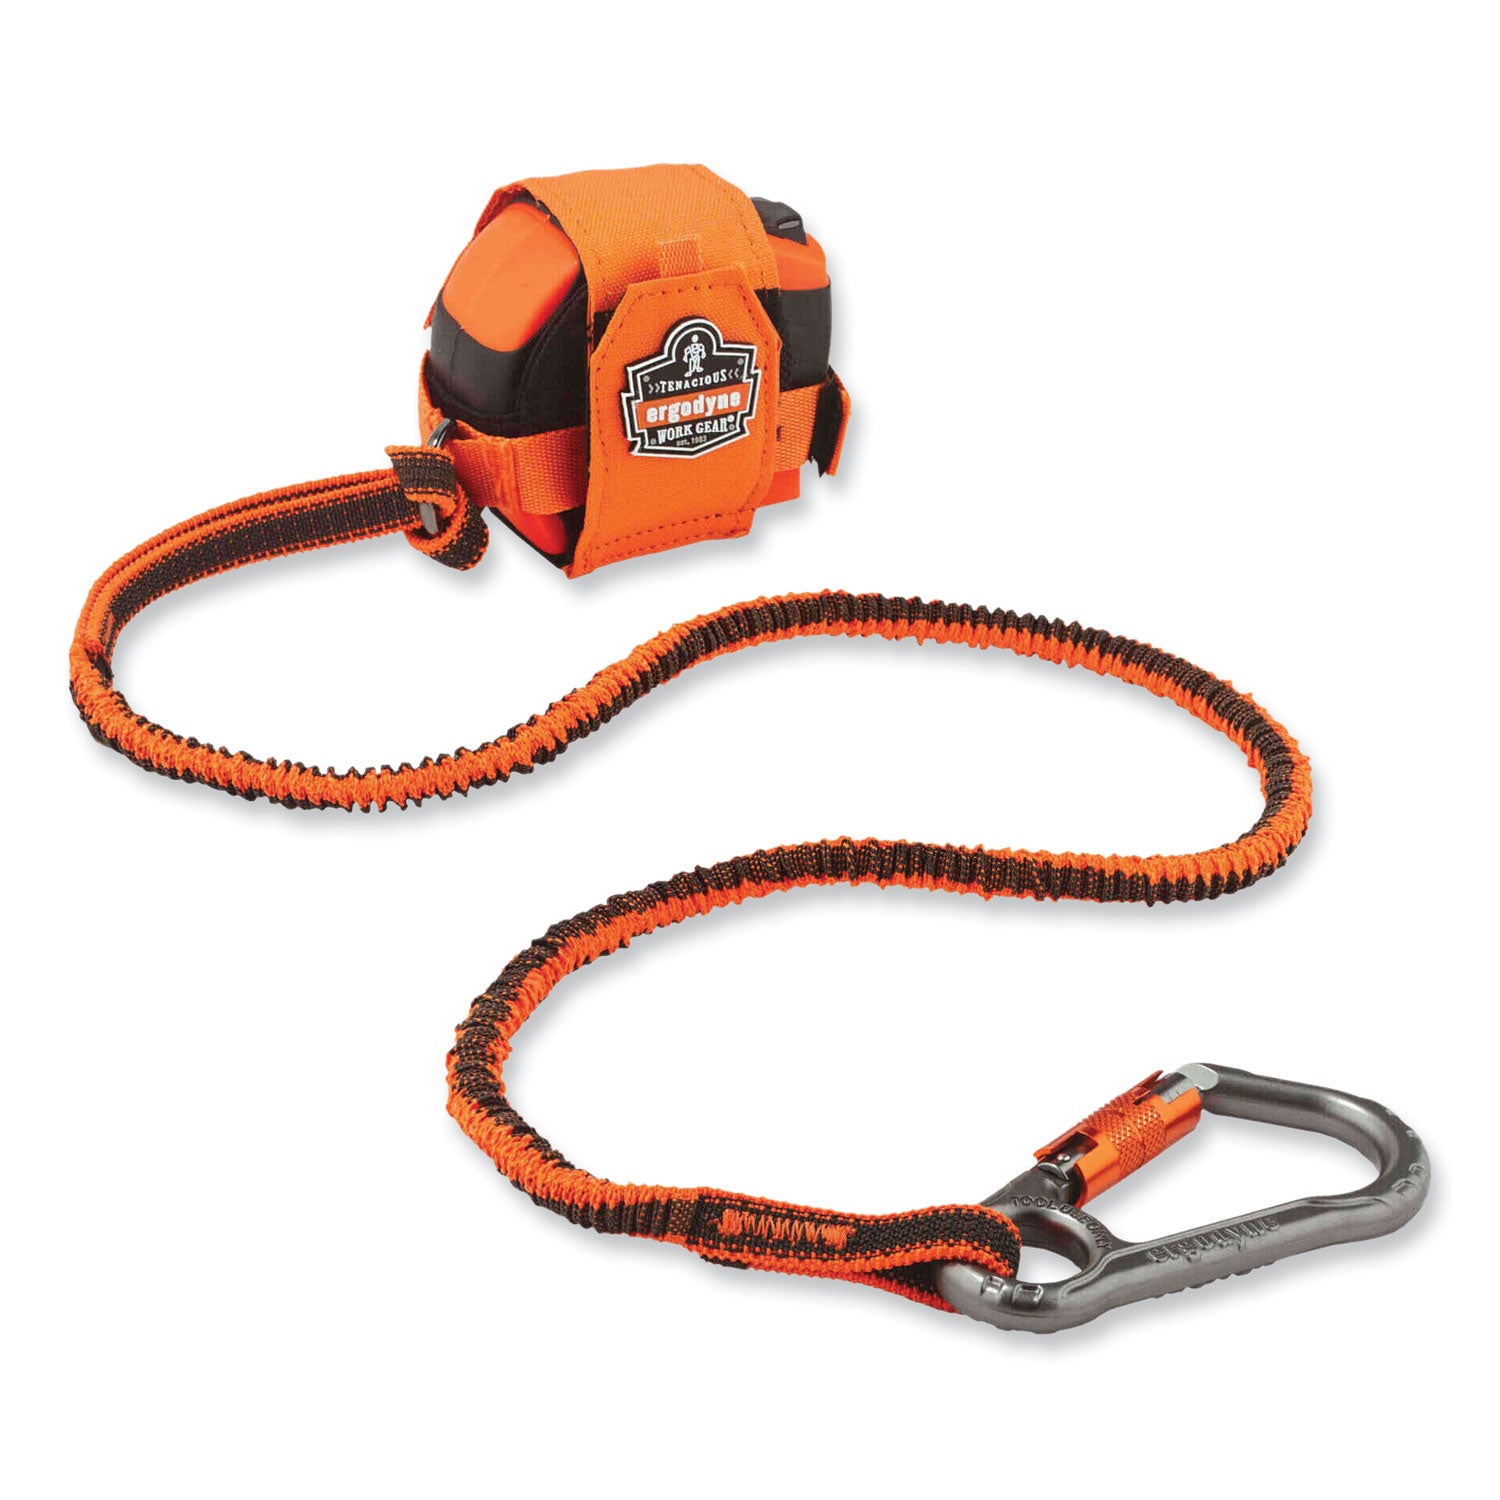 squids-3108fxtool-lanyard-w-locking-aluminum-carabiner+loop-15lb-max-work-cap-38-to-48or-gyships-in-1-3-business-days_ego19808 - 7